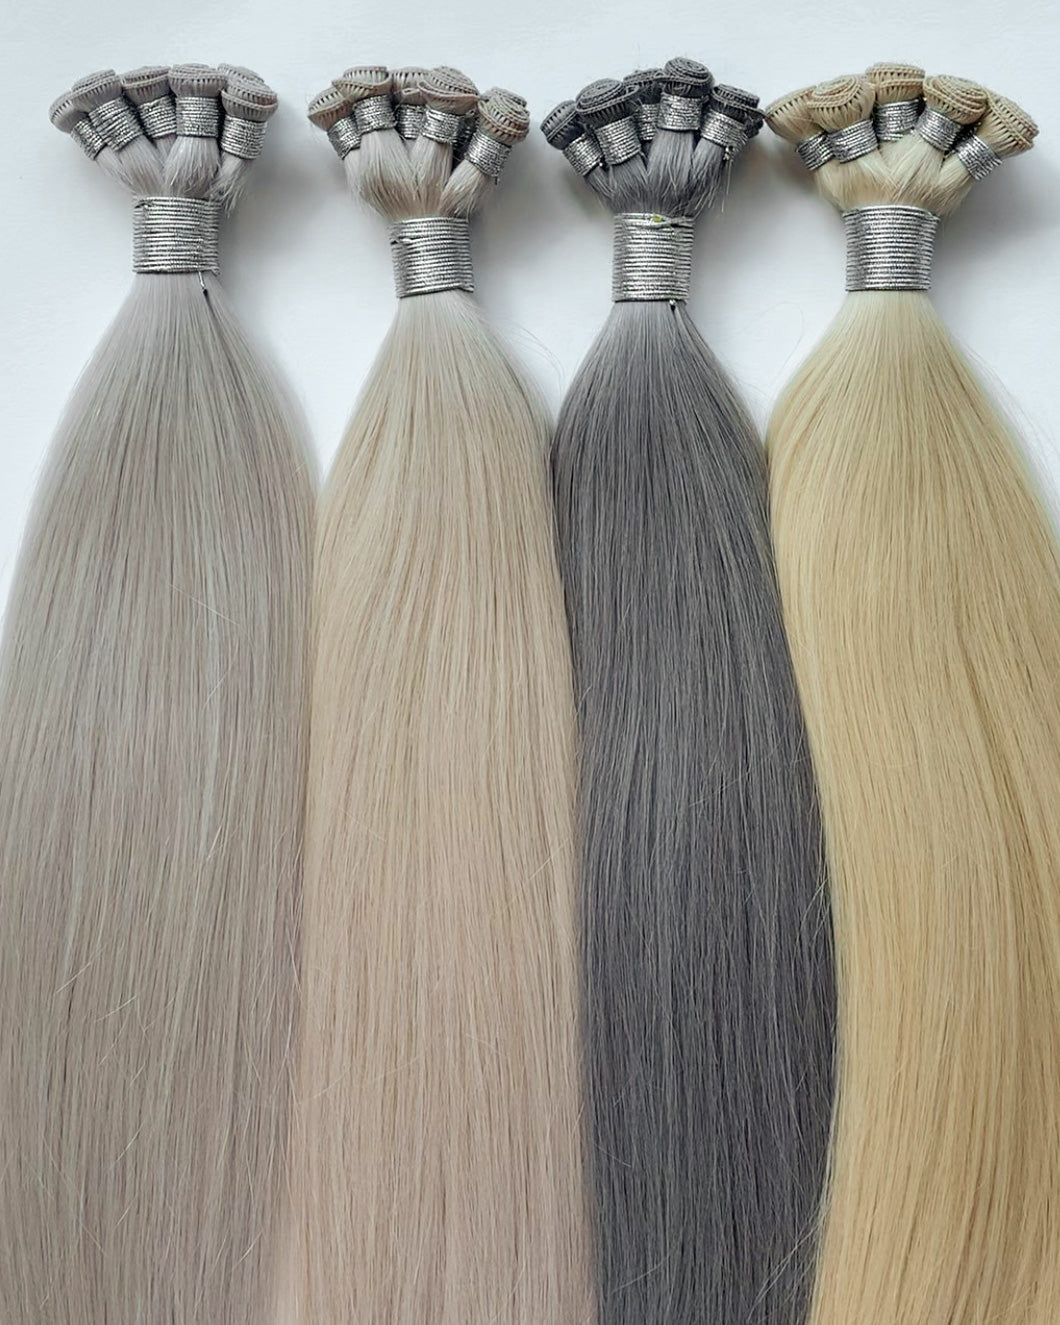 A Guide to Finding a Salon or Stylist to Install your Hairlaya Hand-Tied Extensions